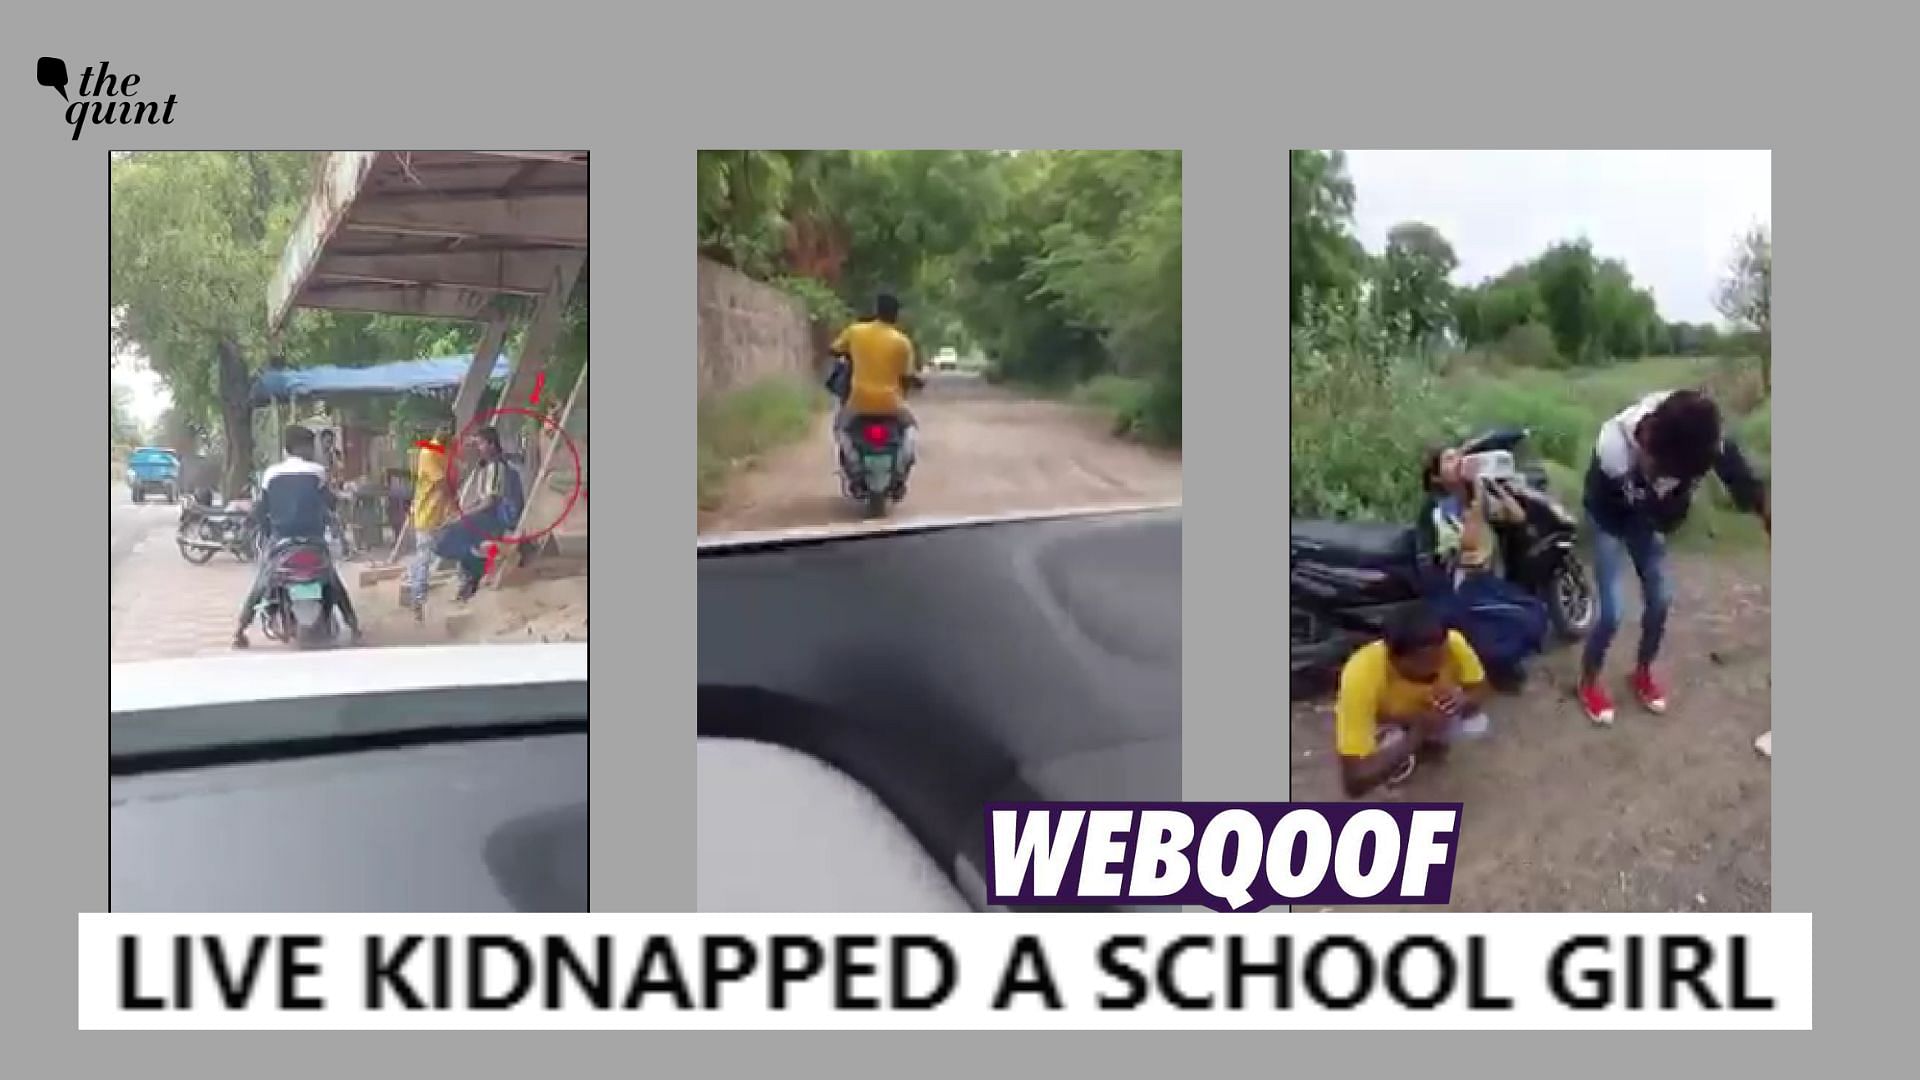 <div class="paragraphs"><p>The claim suggests that the video showing two men kidnapping a schoolgirl is a real incident.&nbsp;</p></div>